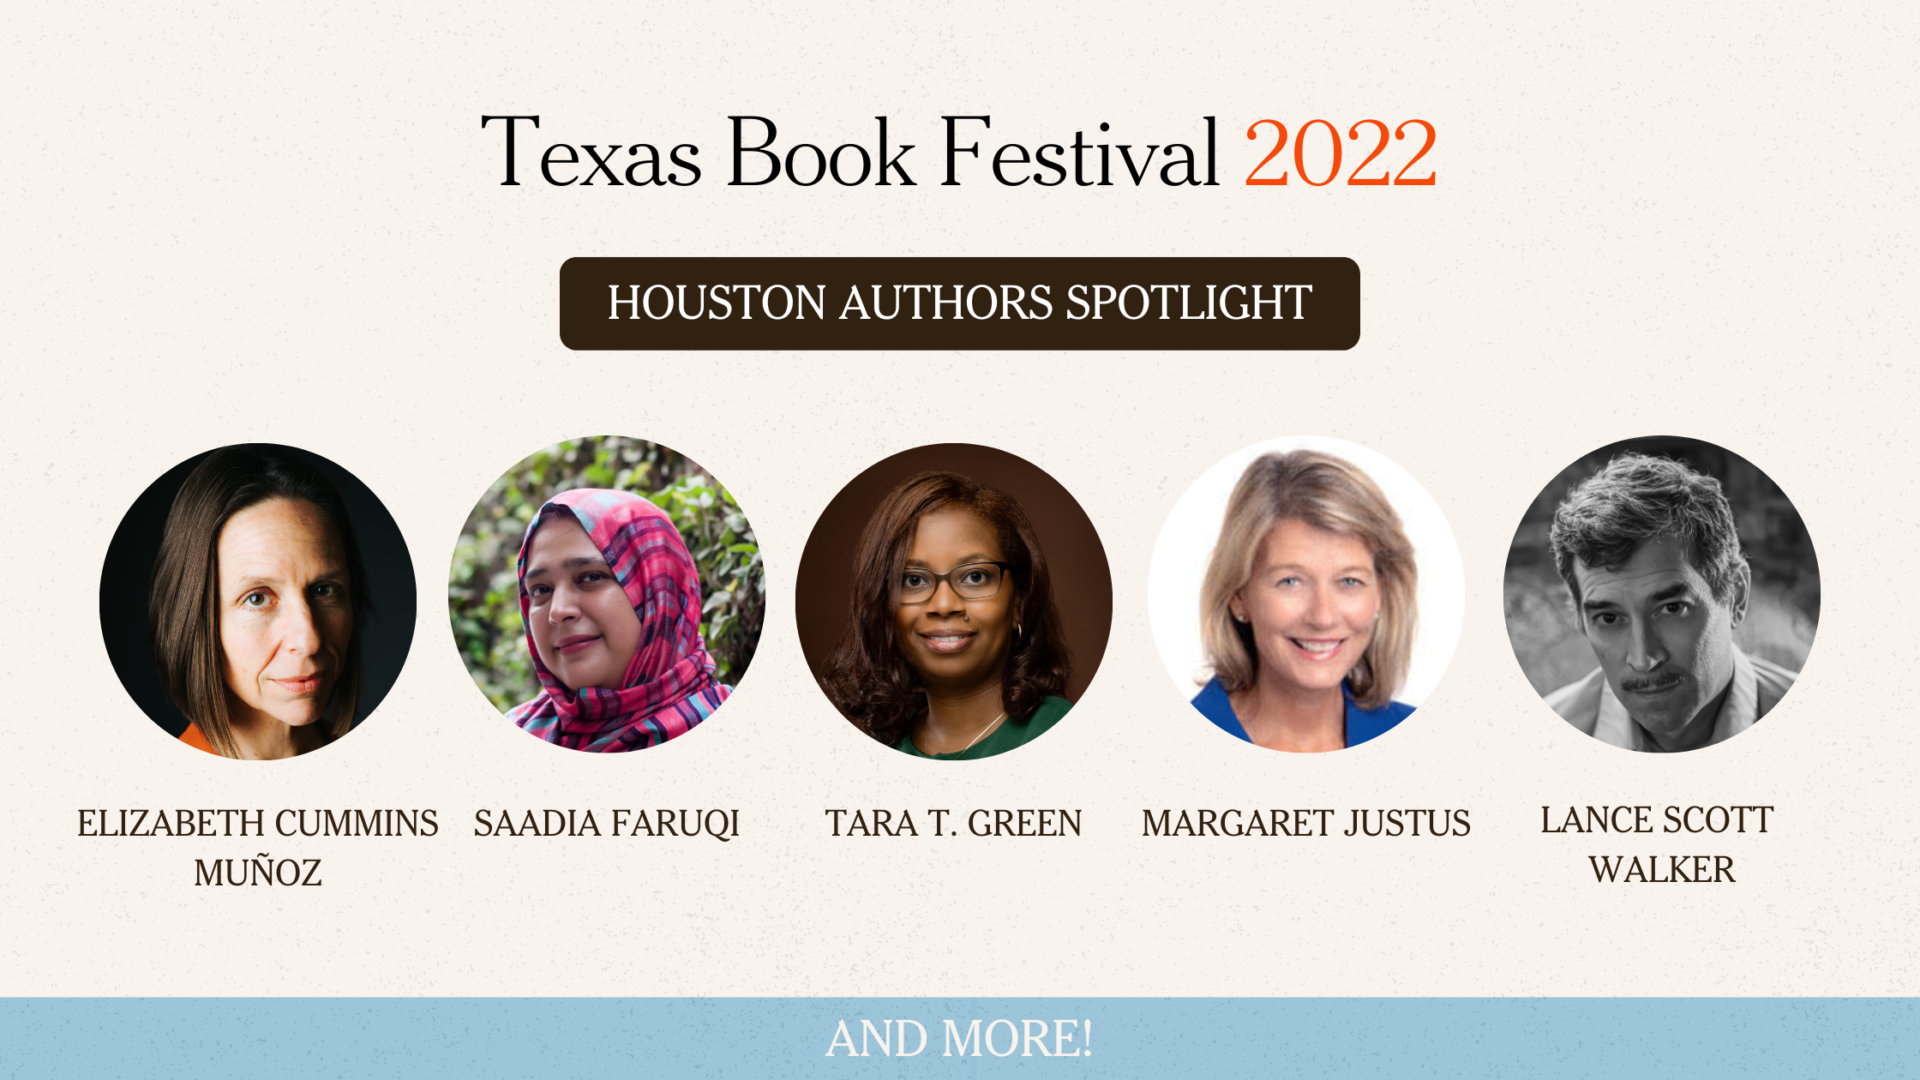 Houston Authors at the 2022 Texas Book Festival